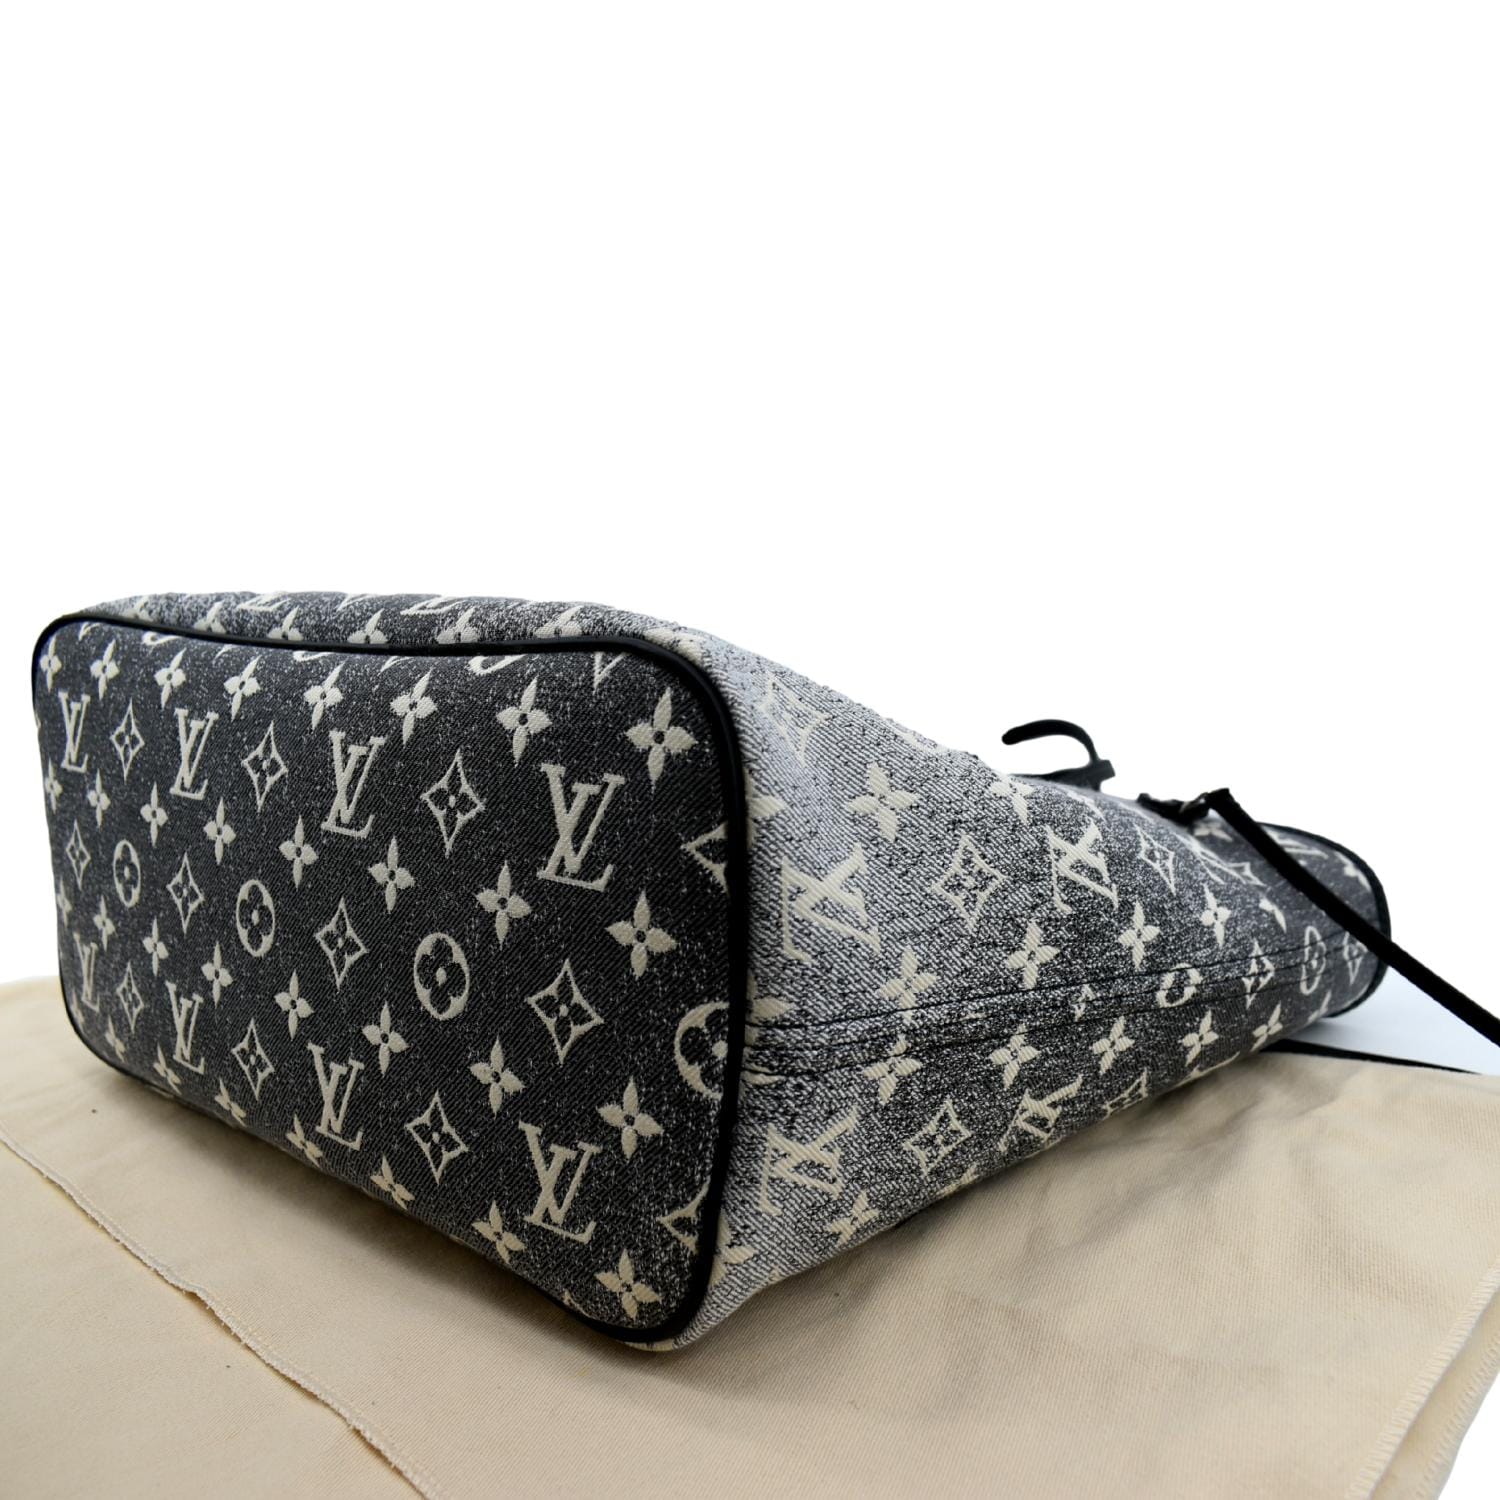 Which Louis Vuitton Neverfull Is Right For YOU?